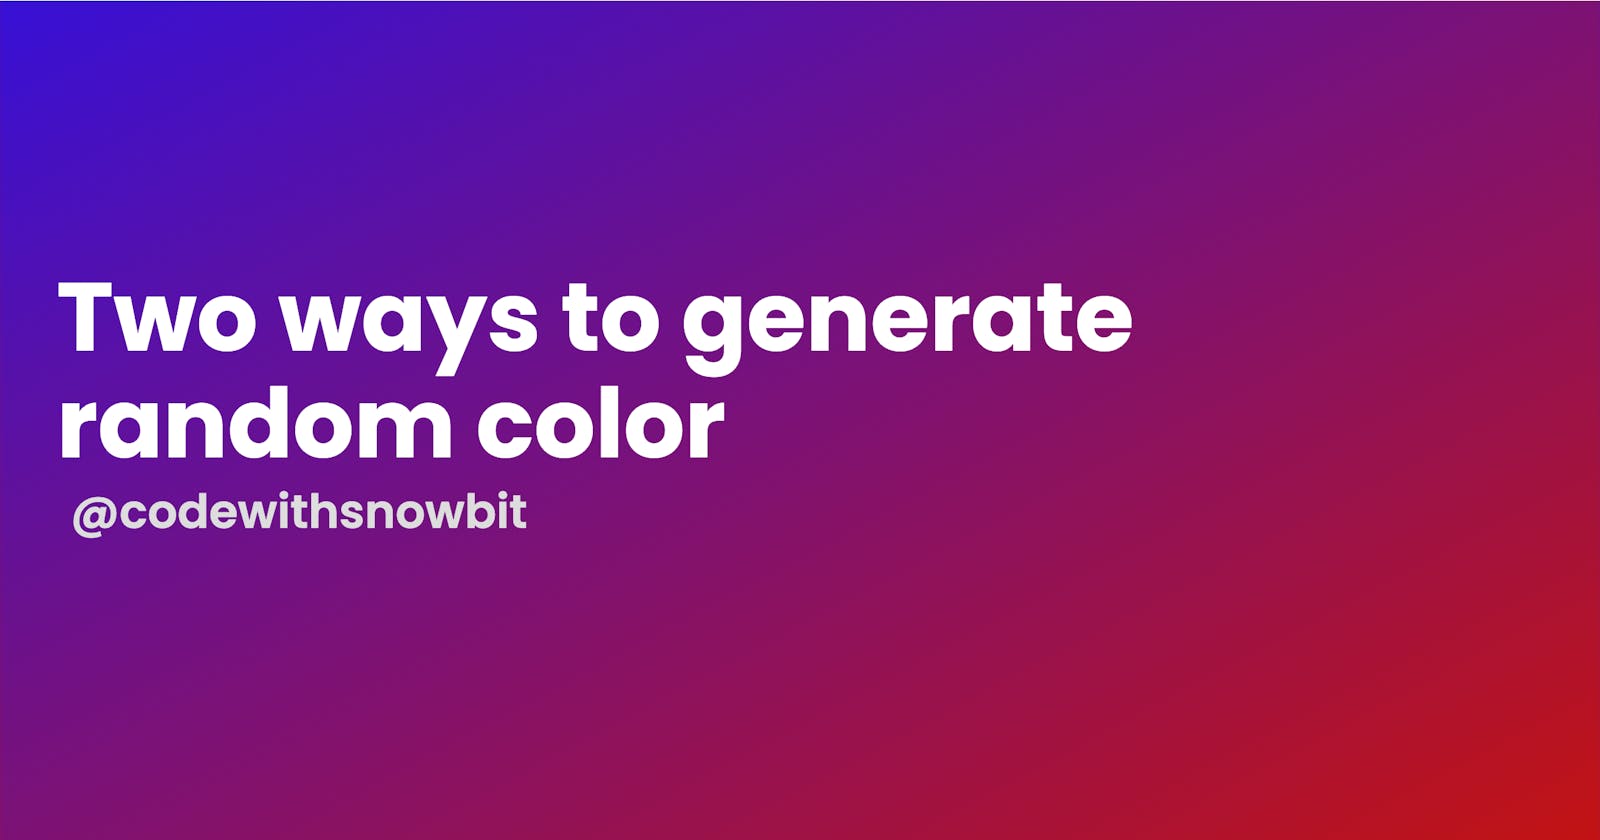 Two ways to generate random color - Daily JavaScript #5